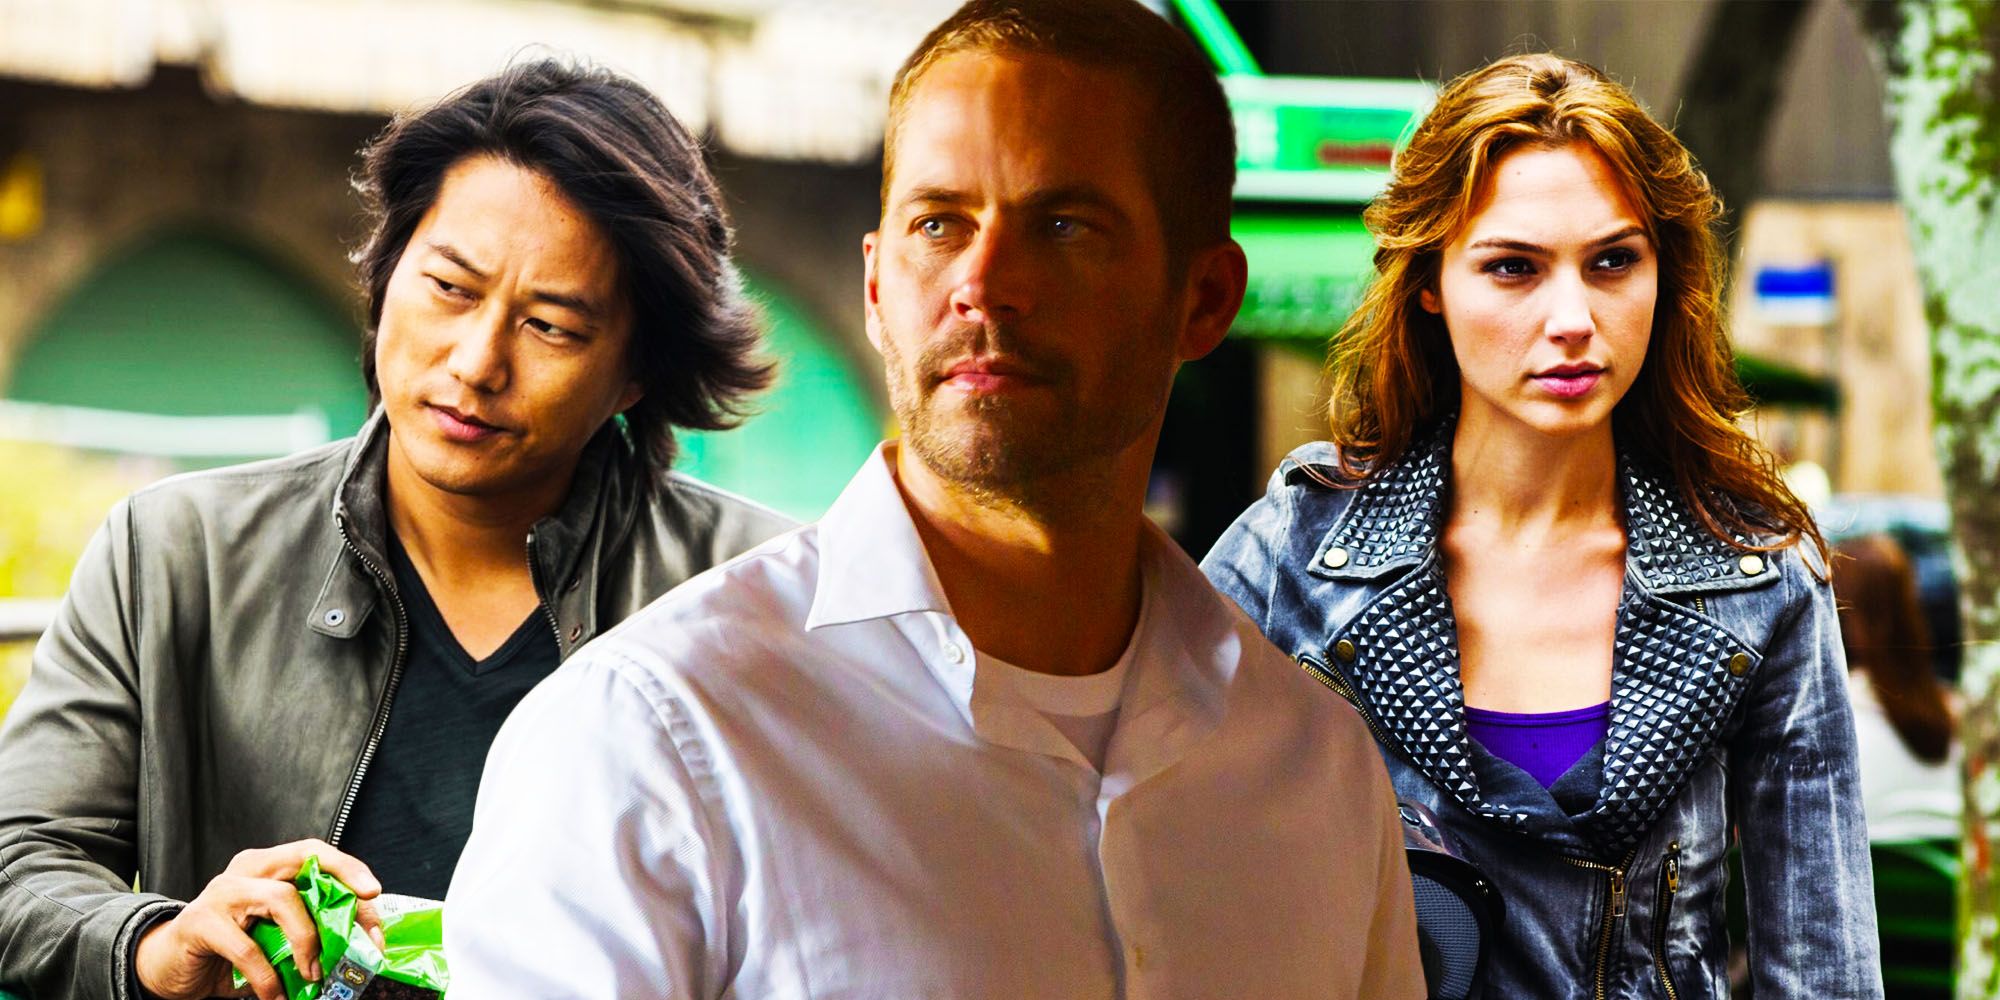 Why Fast & Furious Has To Keep Bringing So Many Characters Back